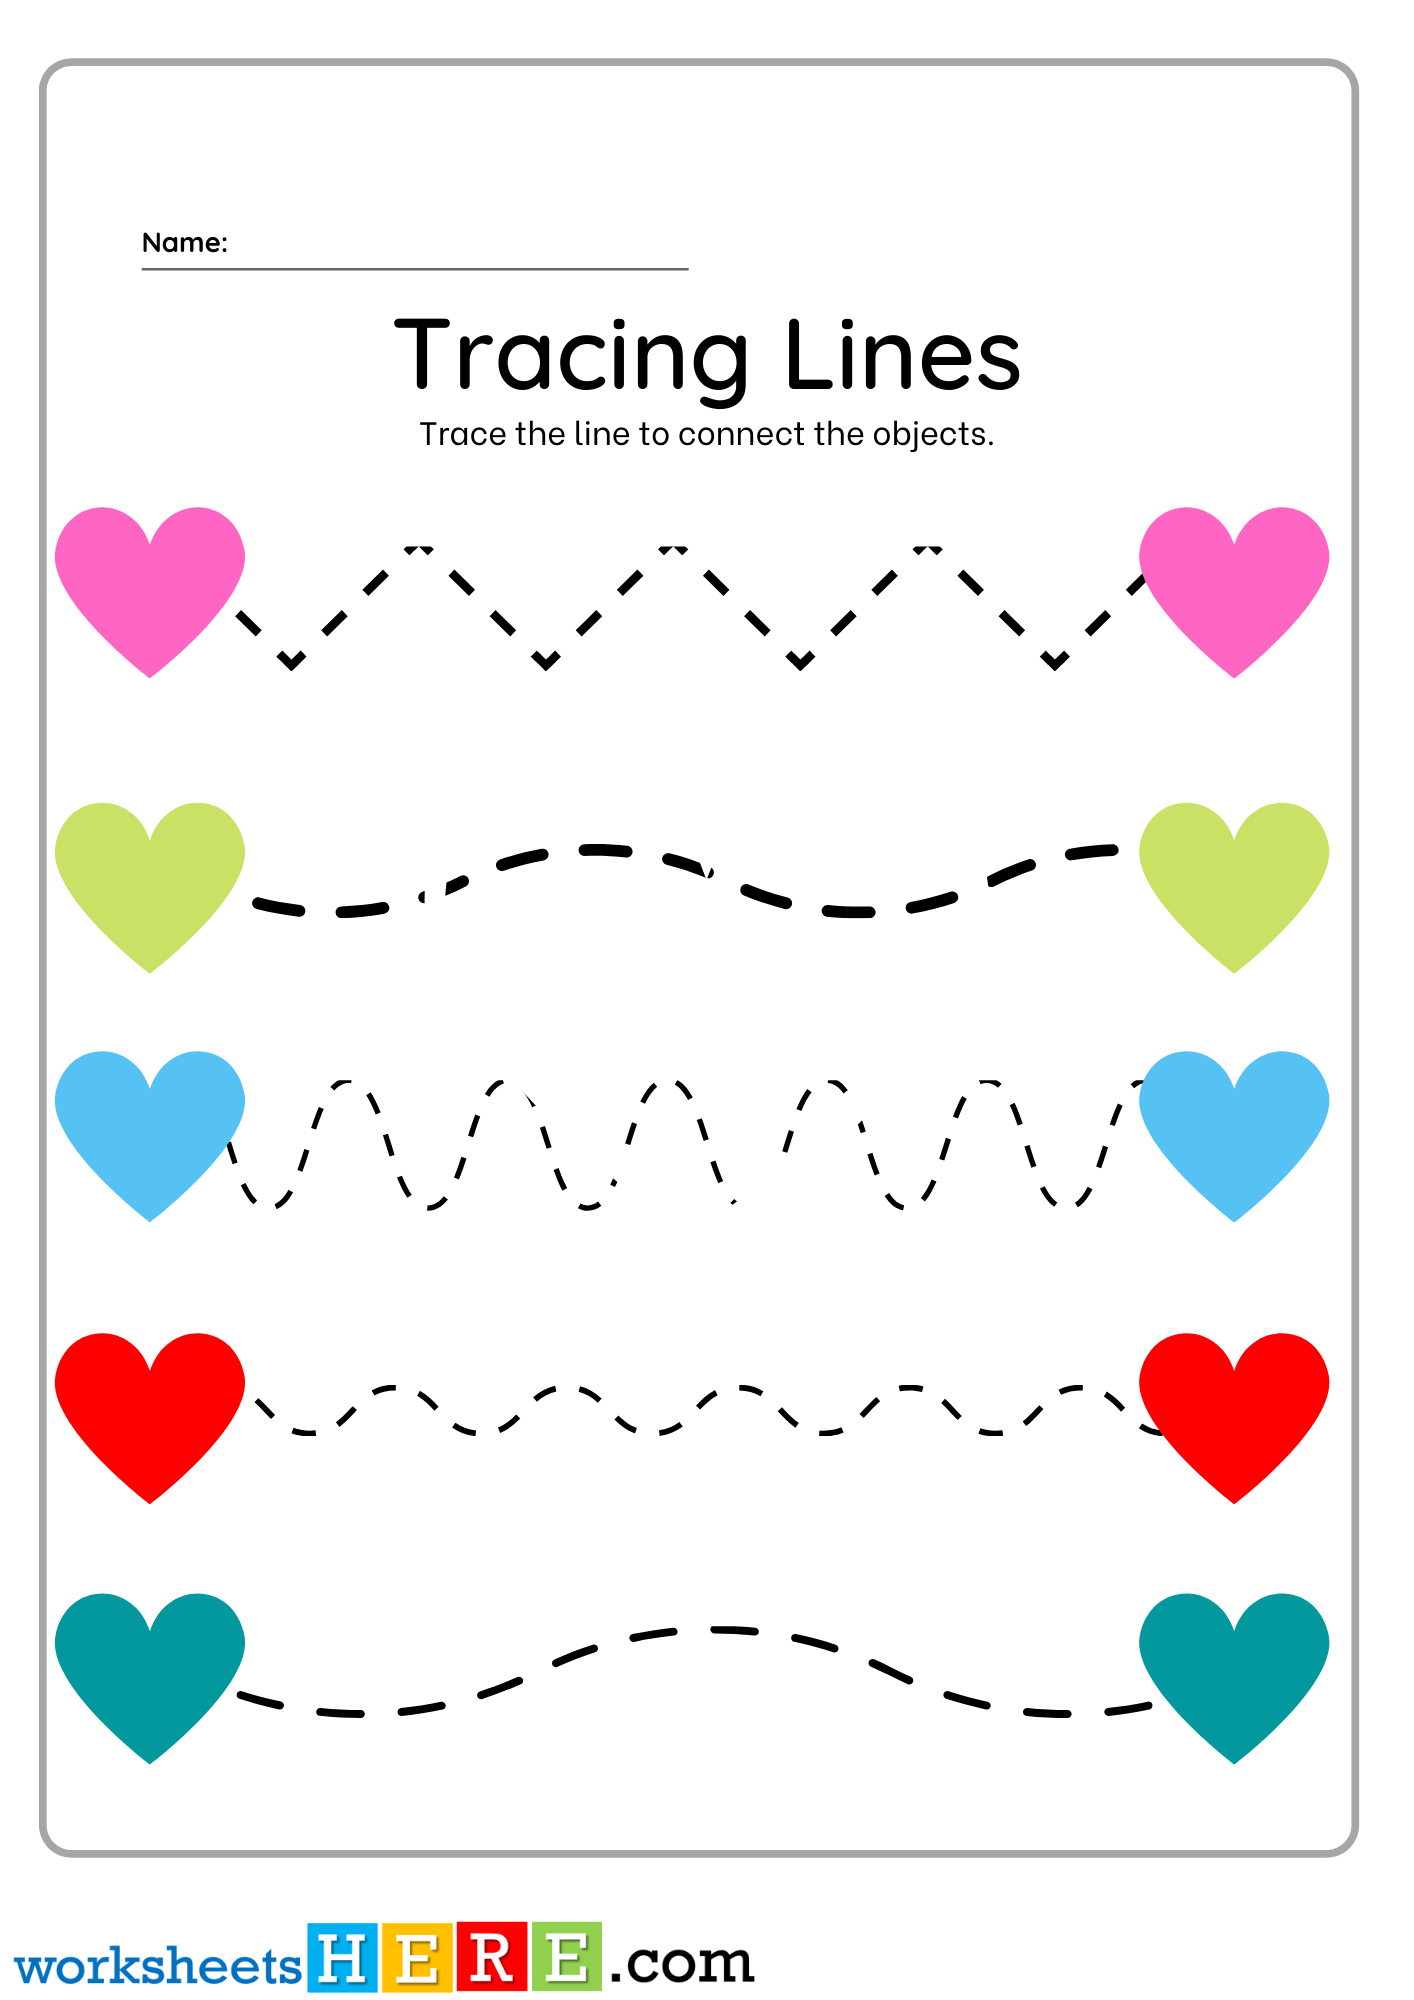 Tracing Lines Worksheet, Trace the Lines with Hearts PDF Worksheet For Kids